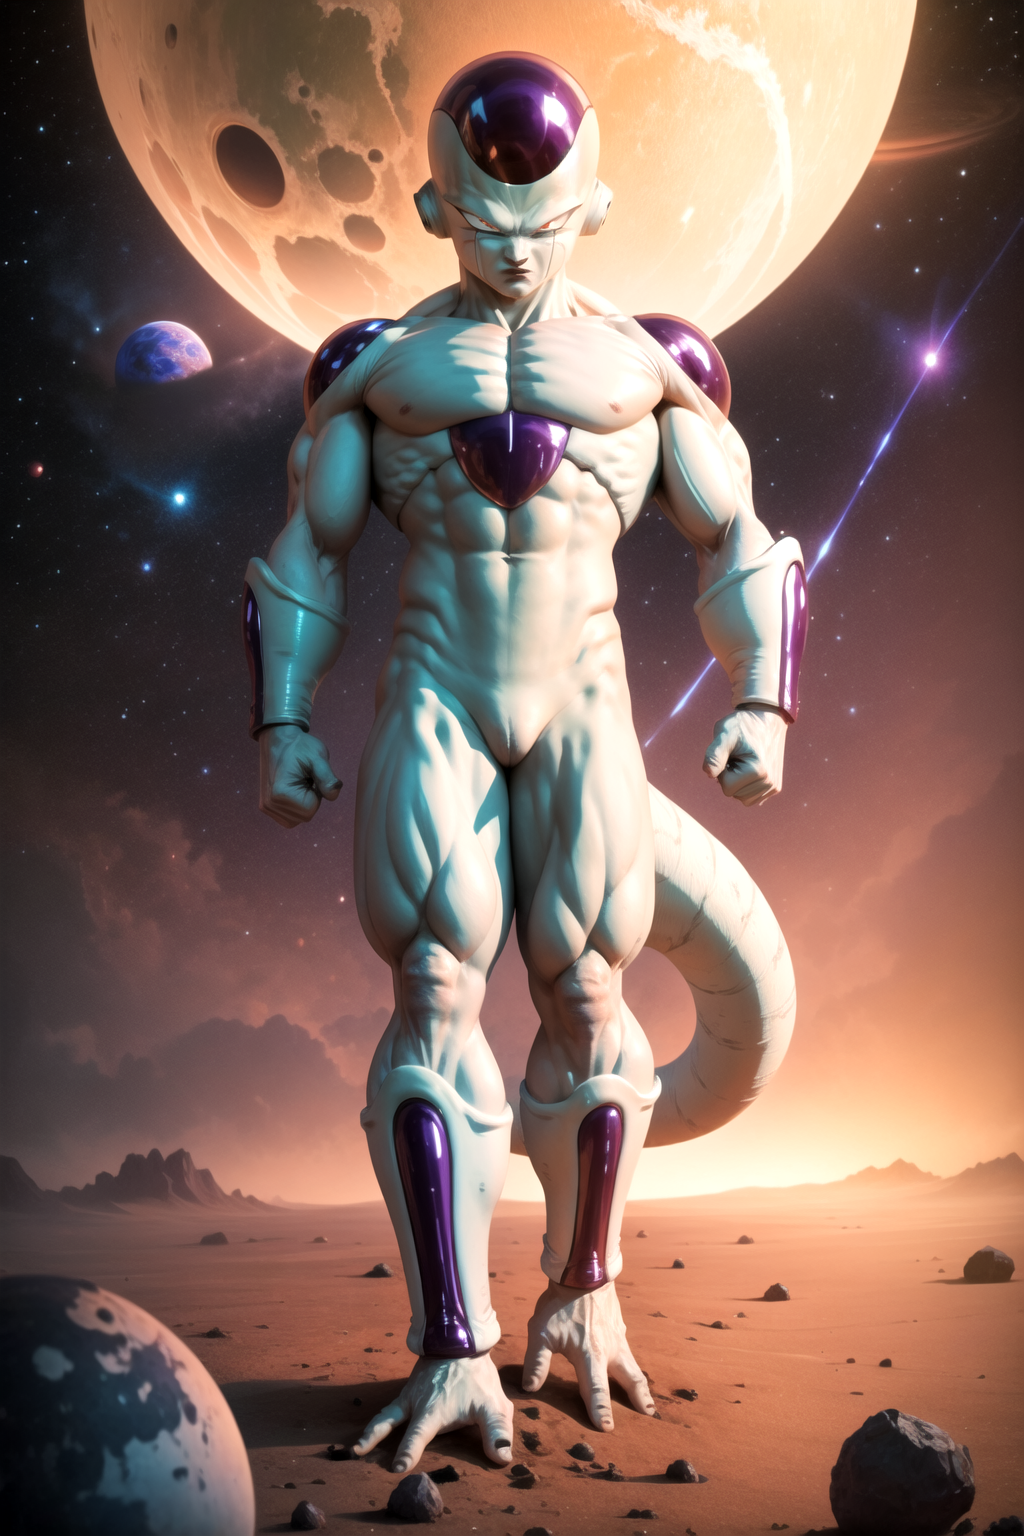 "A Muscular Blue and White Dragon Standing Against a Backdrop of Planets"